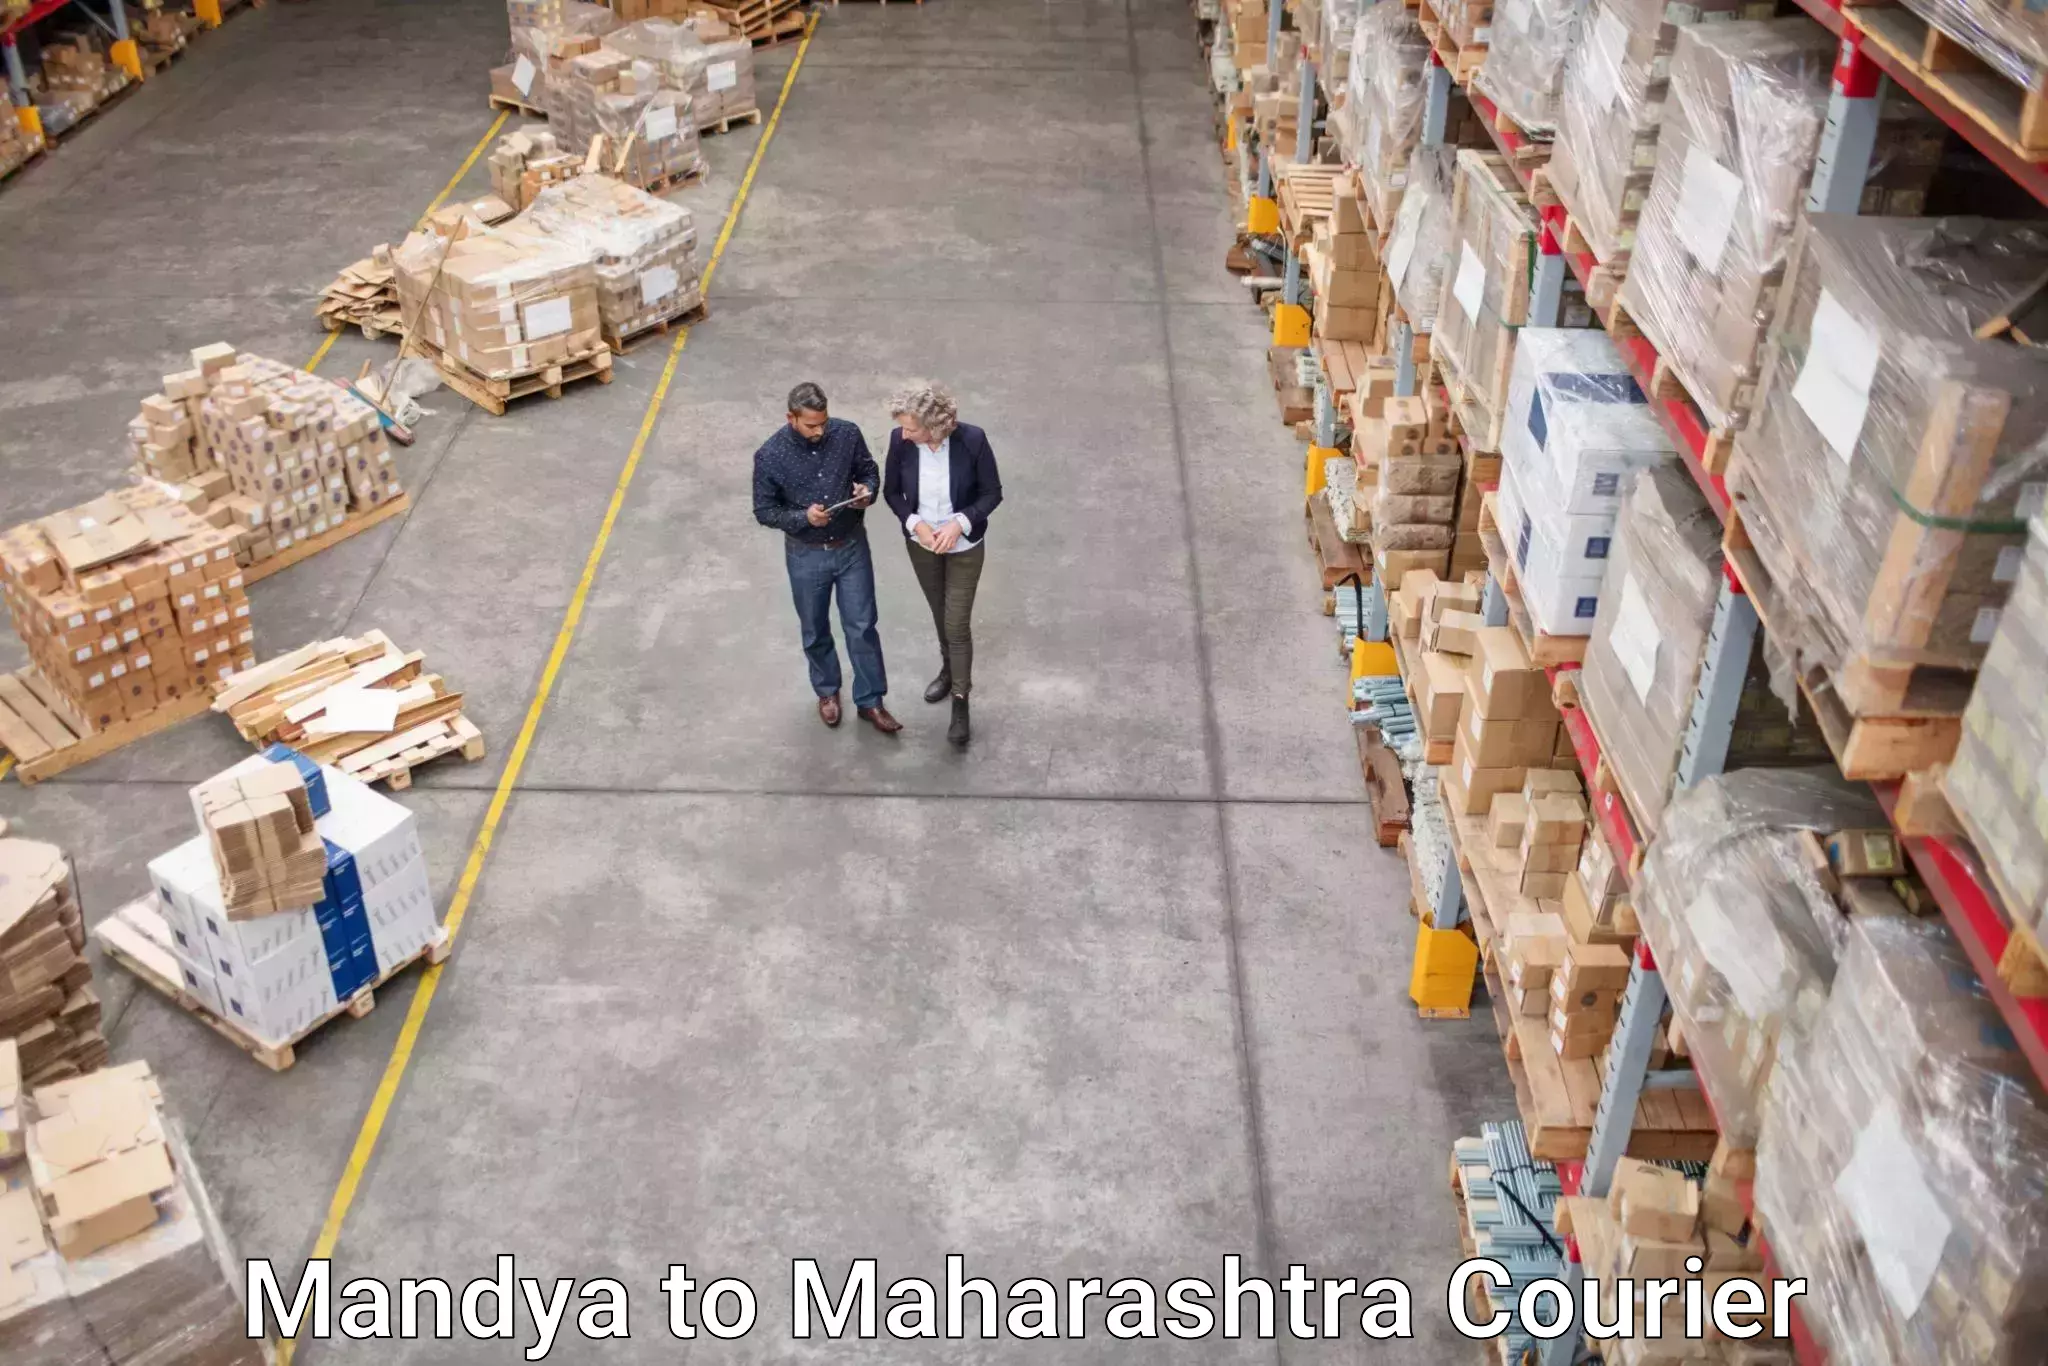 24/7 shipping services Mandya to Pune